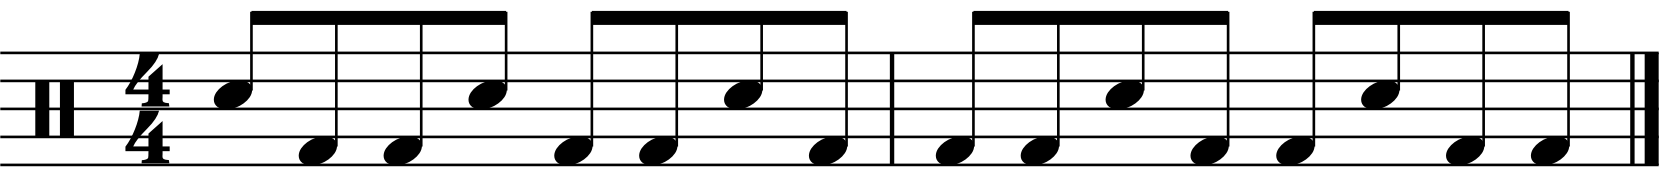 The kick and snares for this version of the groove